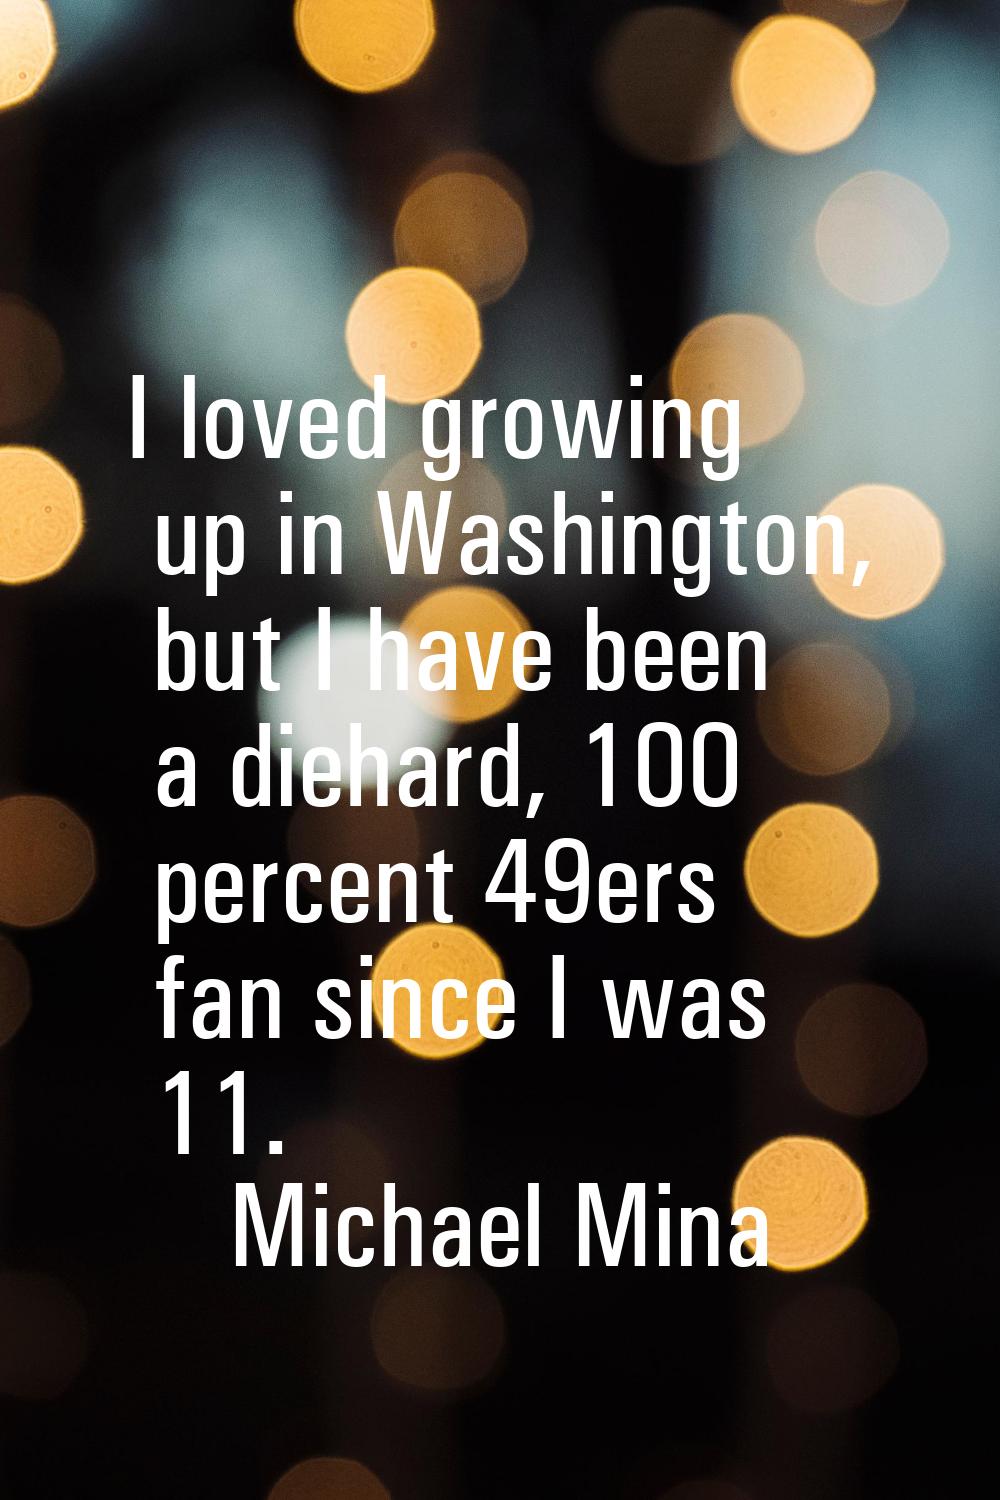 I loved growing up in Washington, but I have been a diehard, 100 percent 49ers fan since I was 11.